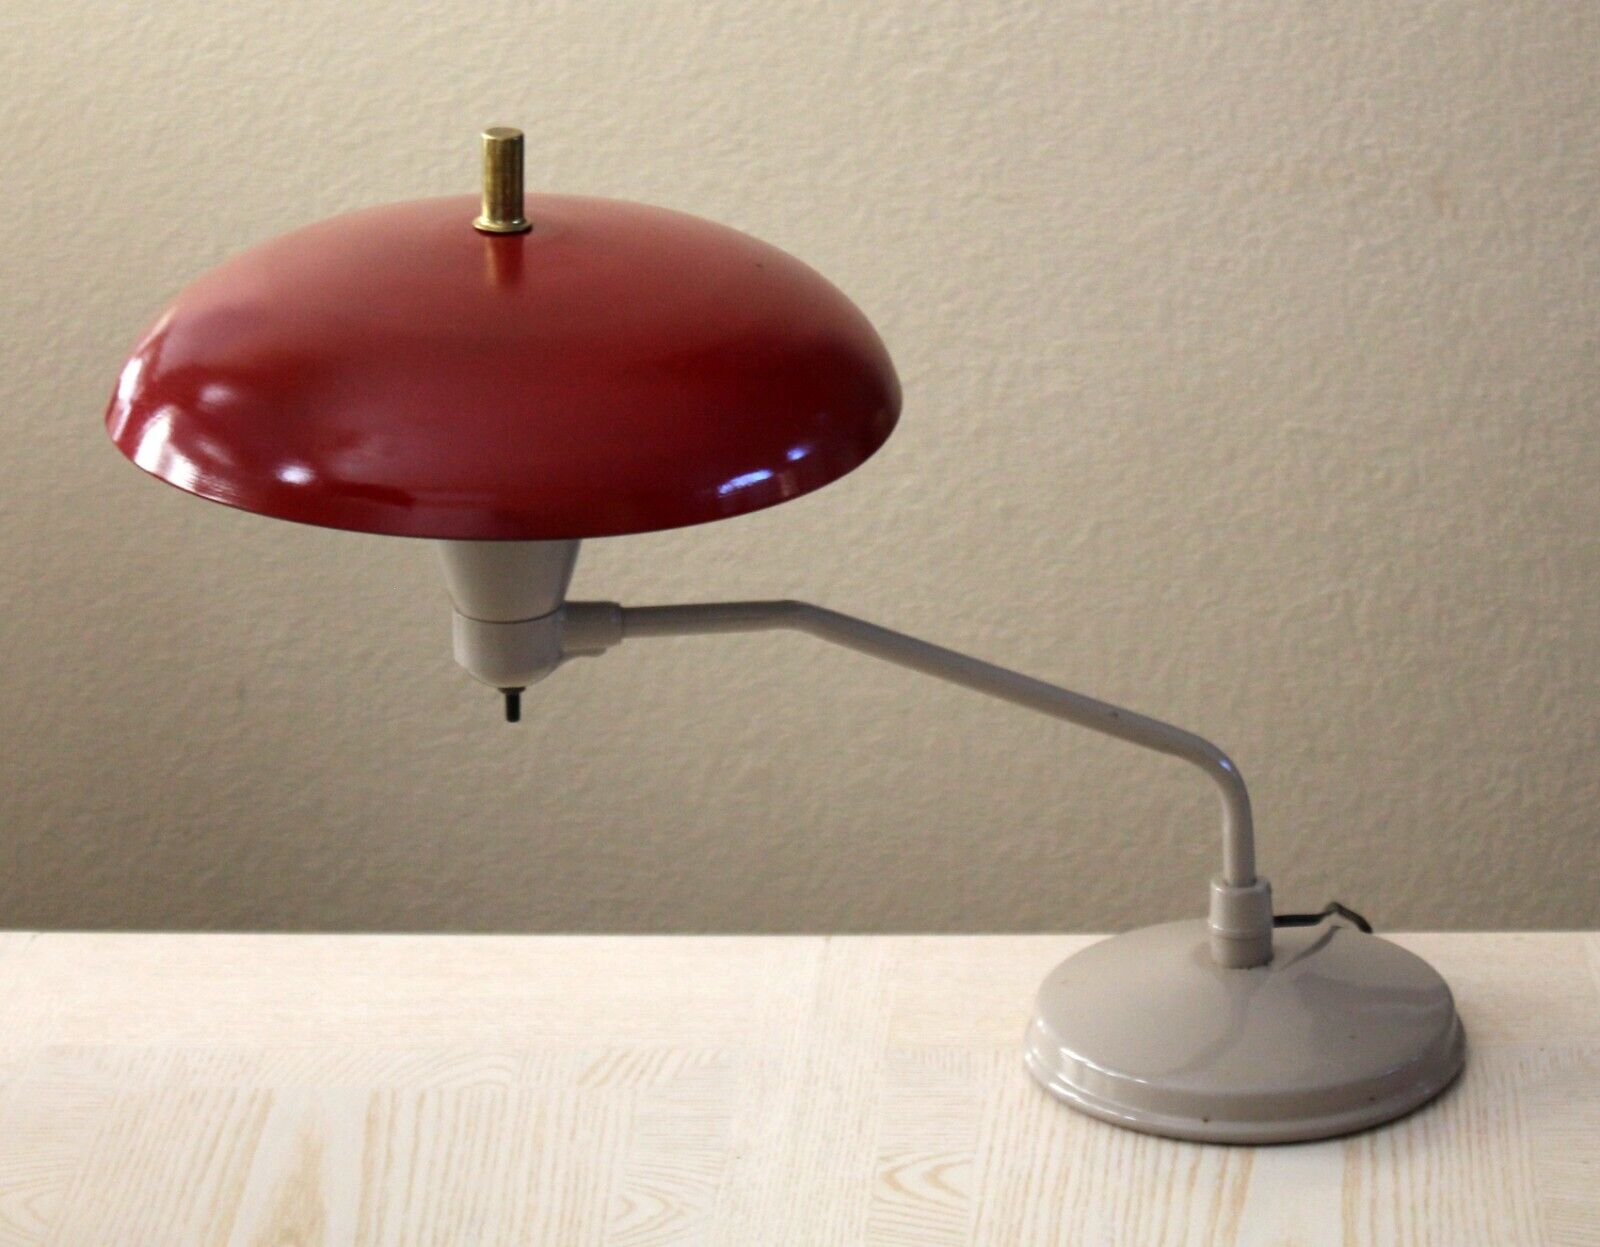 MINTY MID CENTURY MODERN SAUCER TABLE LAMP ATOMIC 1950S RARE SWING ARM